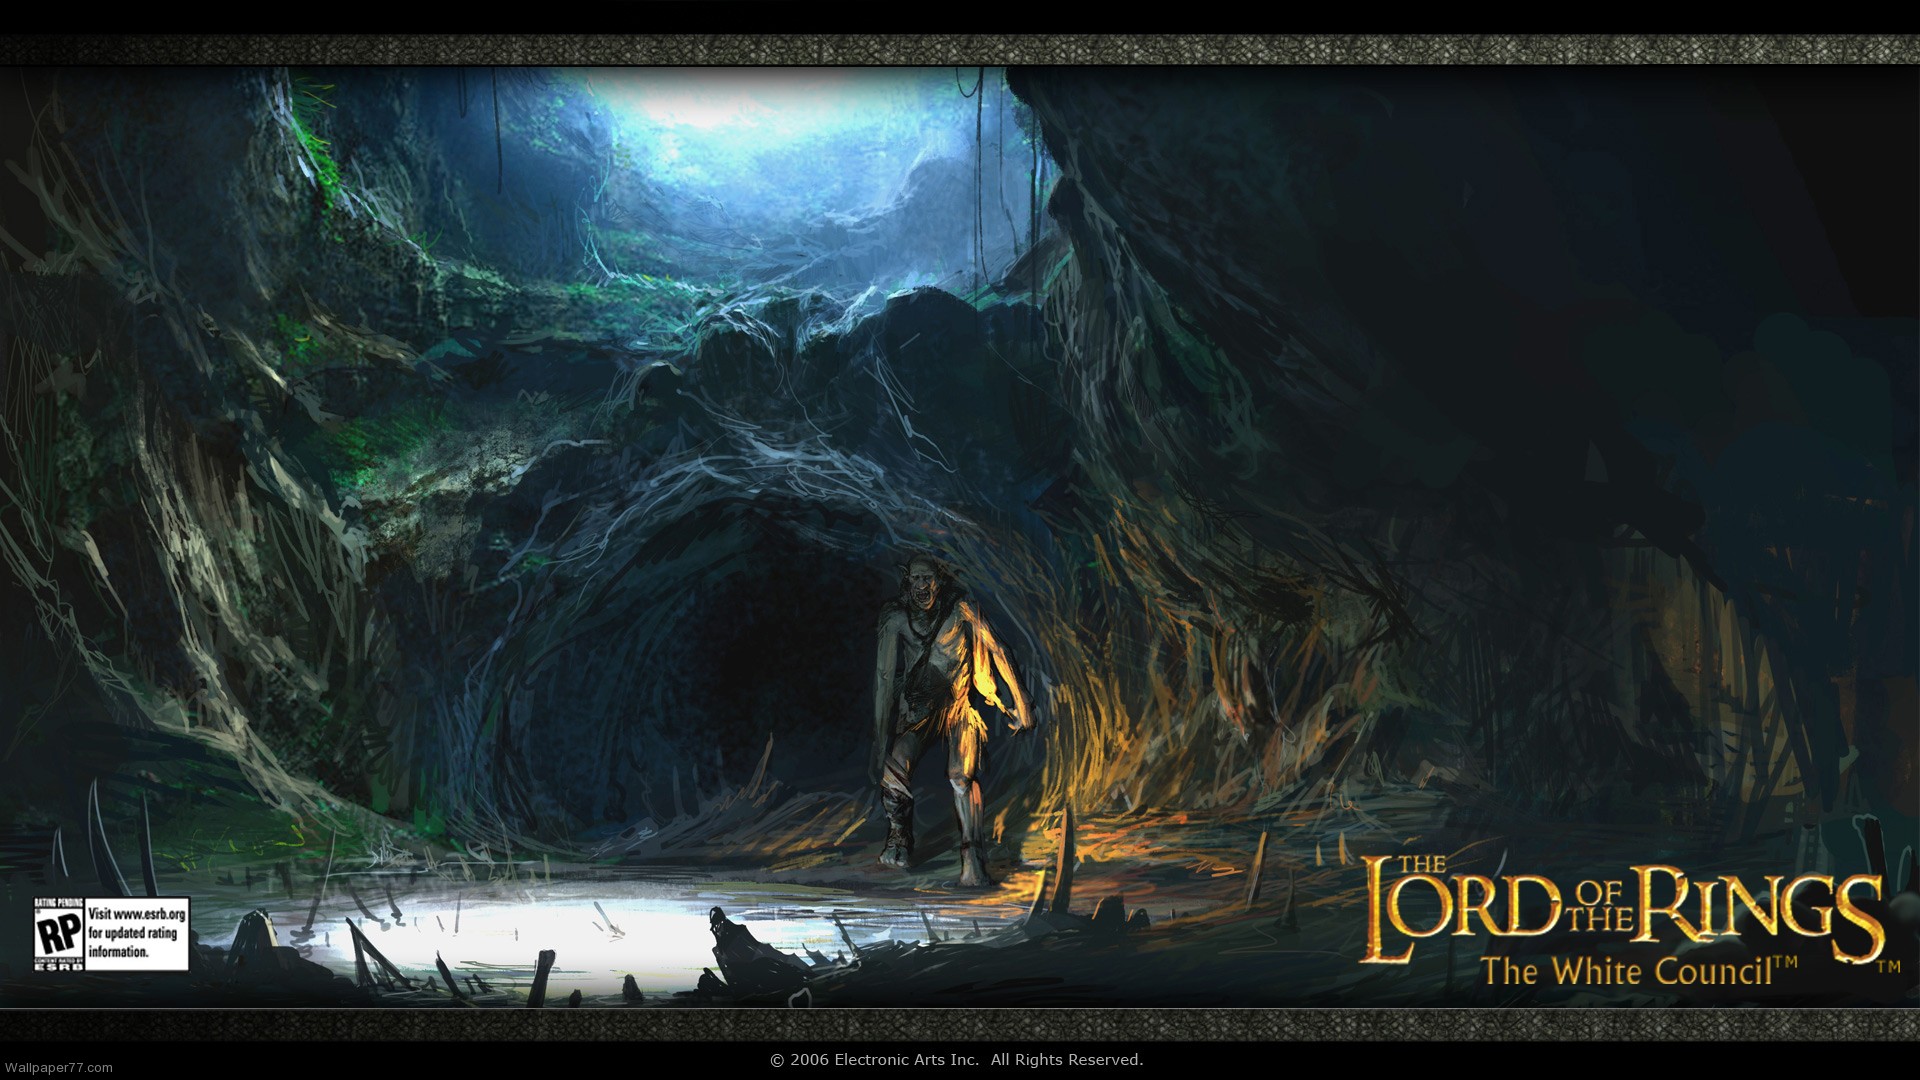  lord of the rings wallpaperslord of the rings wallpaper  1920x1080jpg 1920x1080